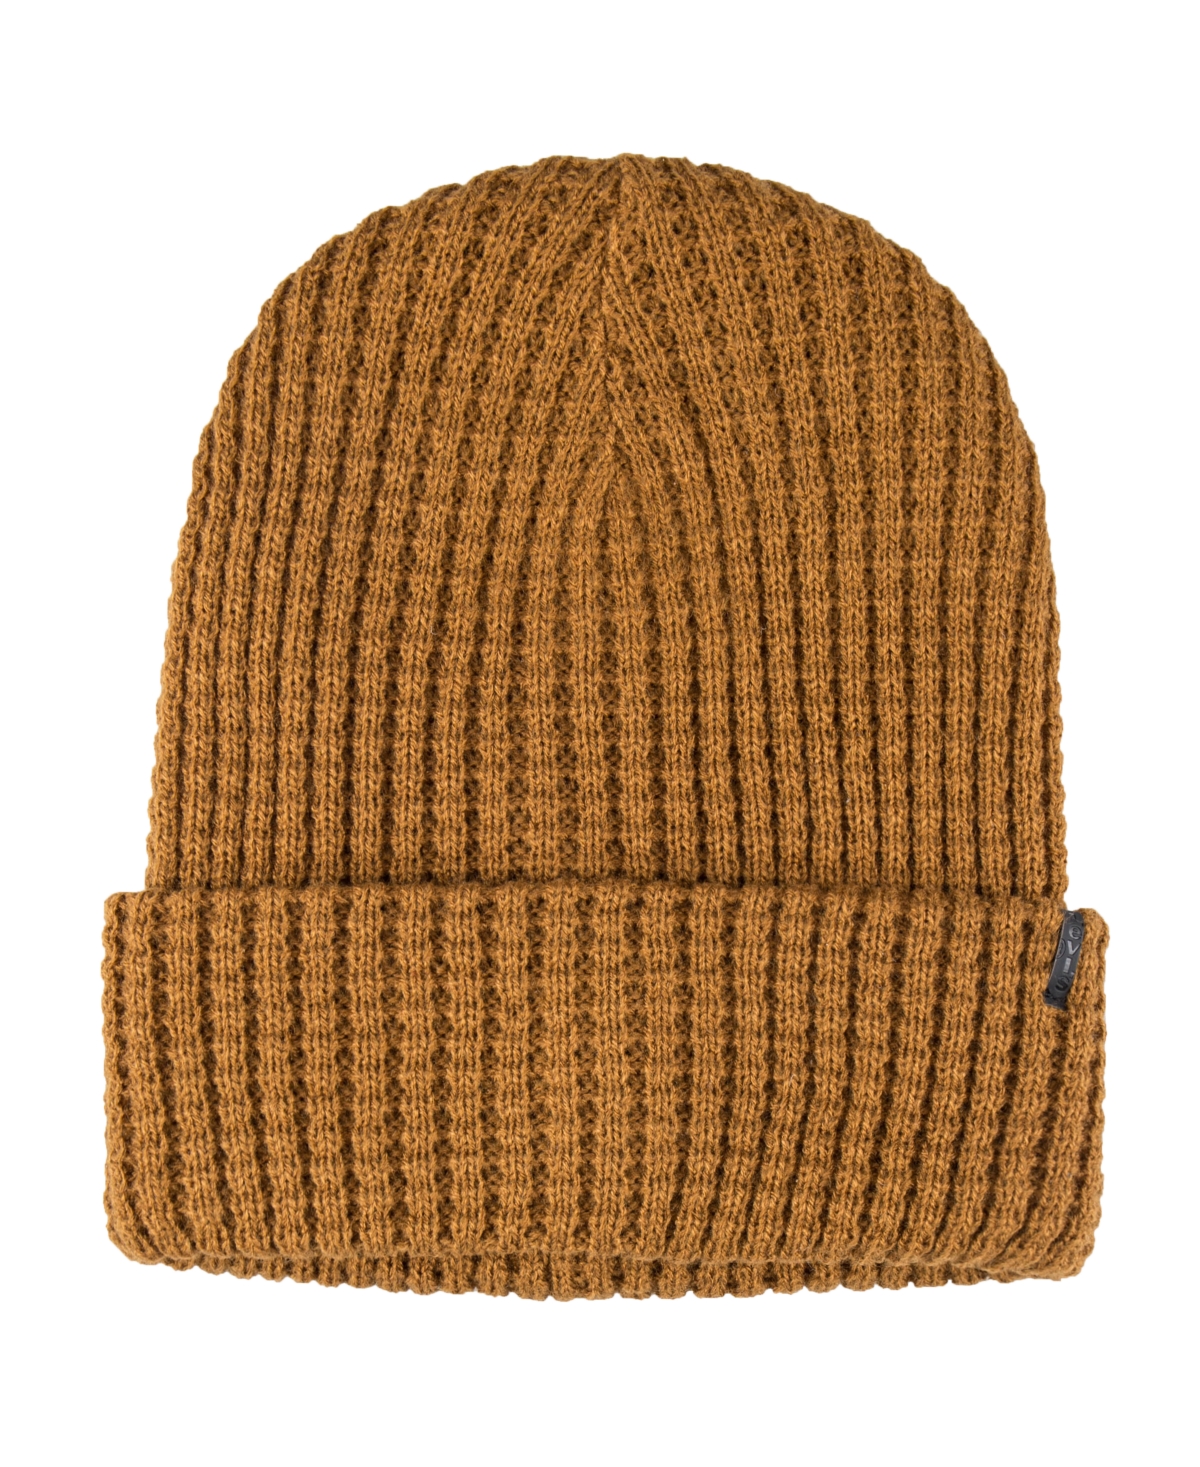 Men's Two-In-One Reversible Waffle Knit Beanie - Tan